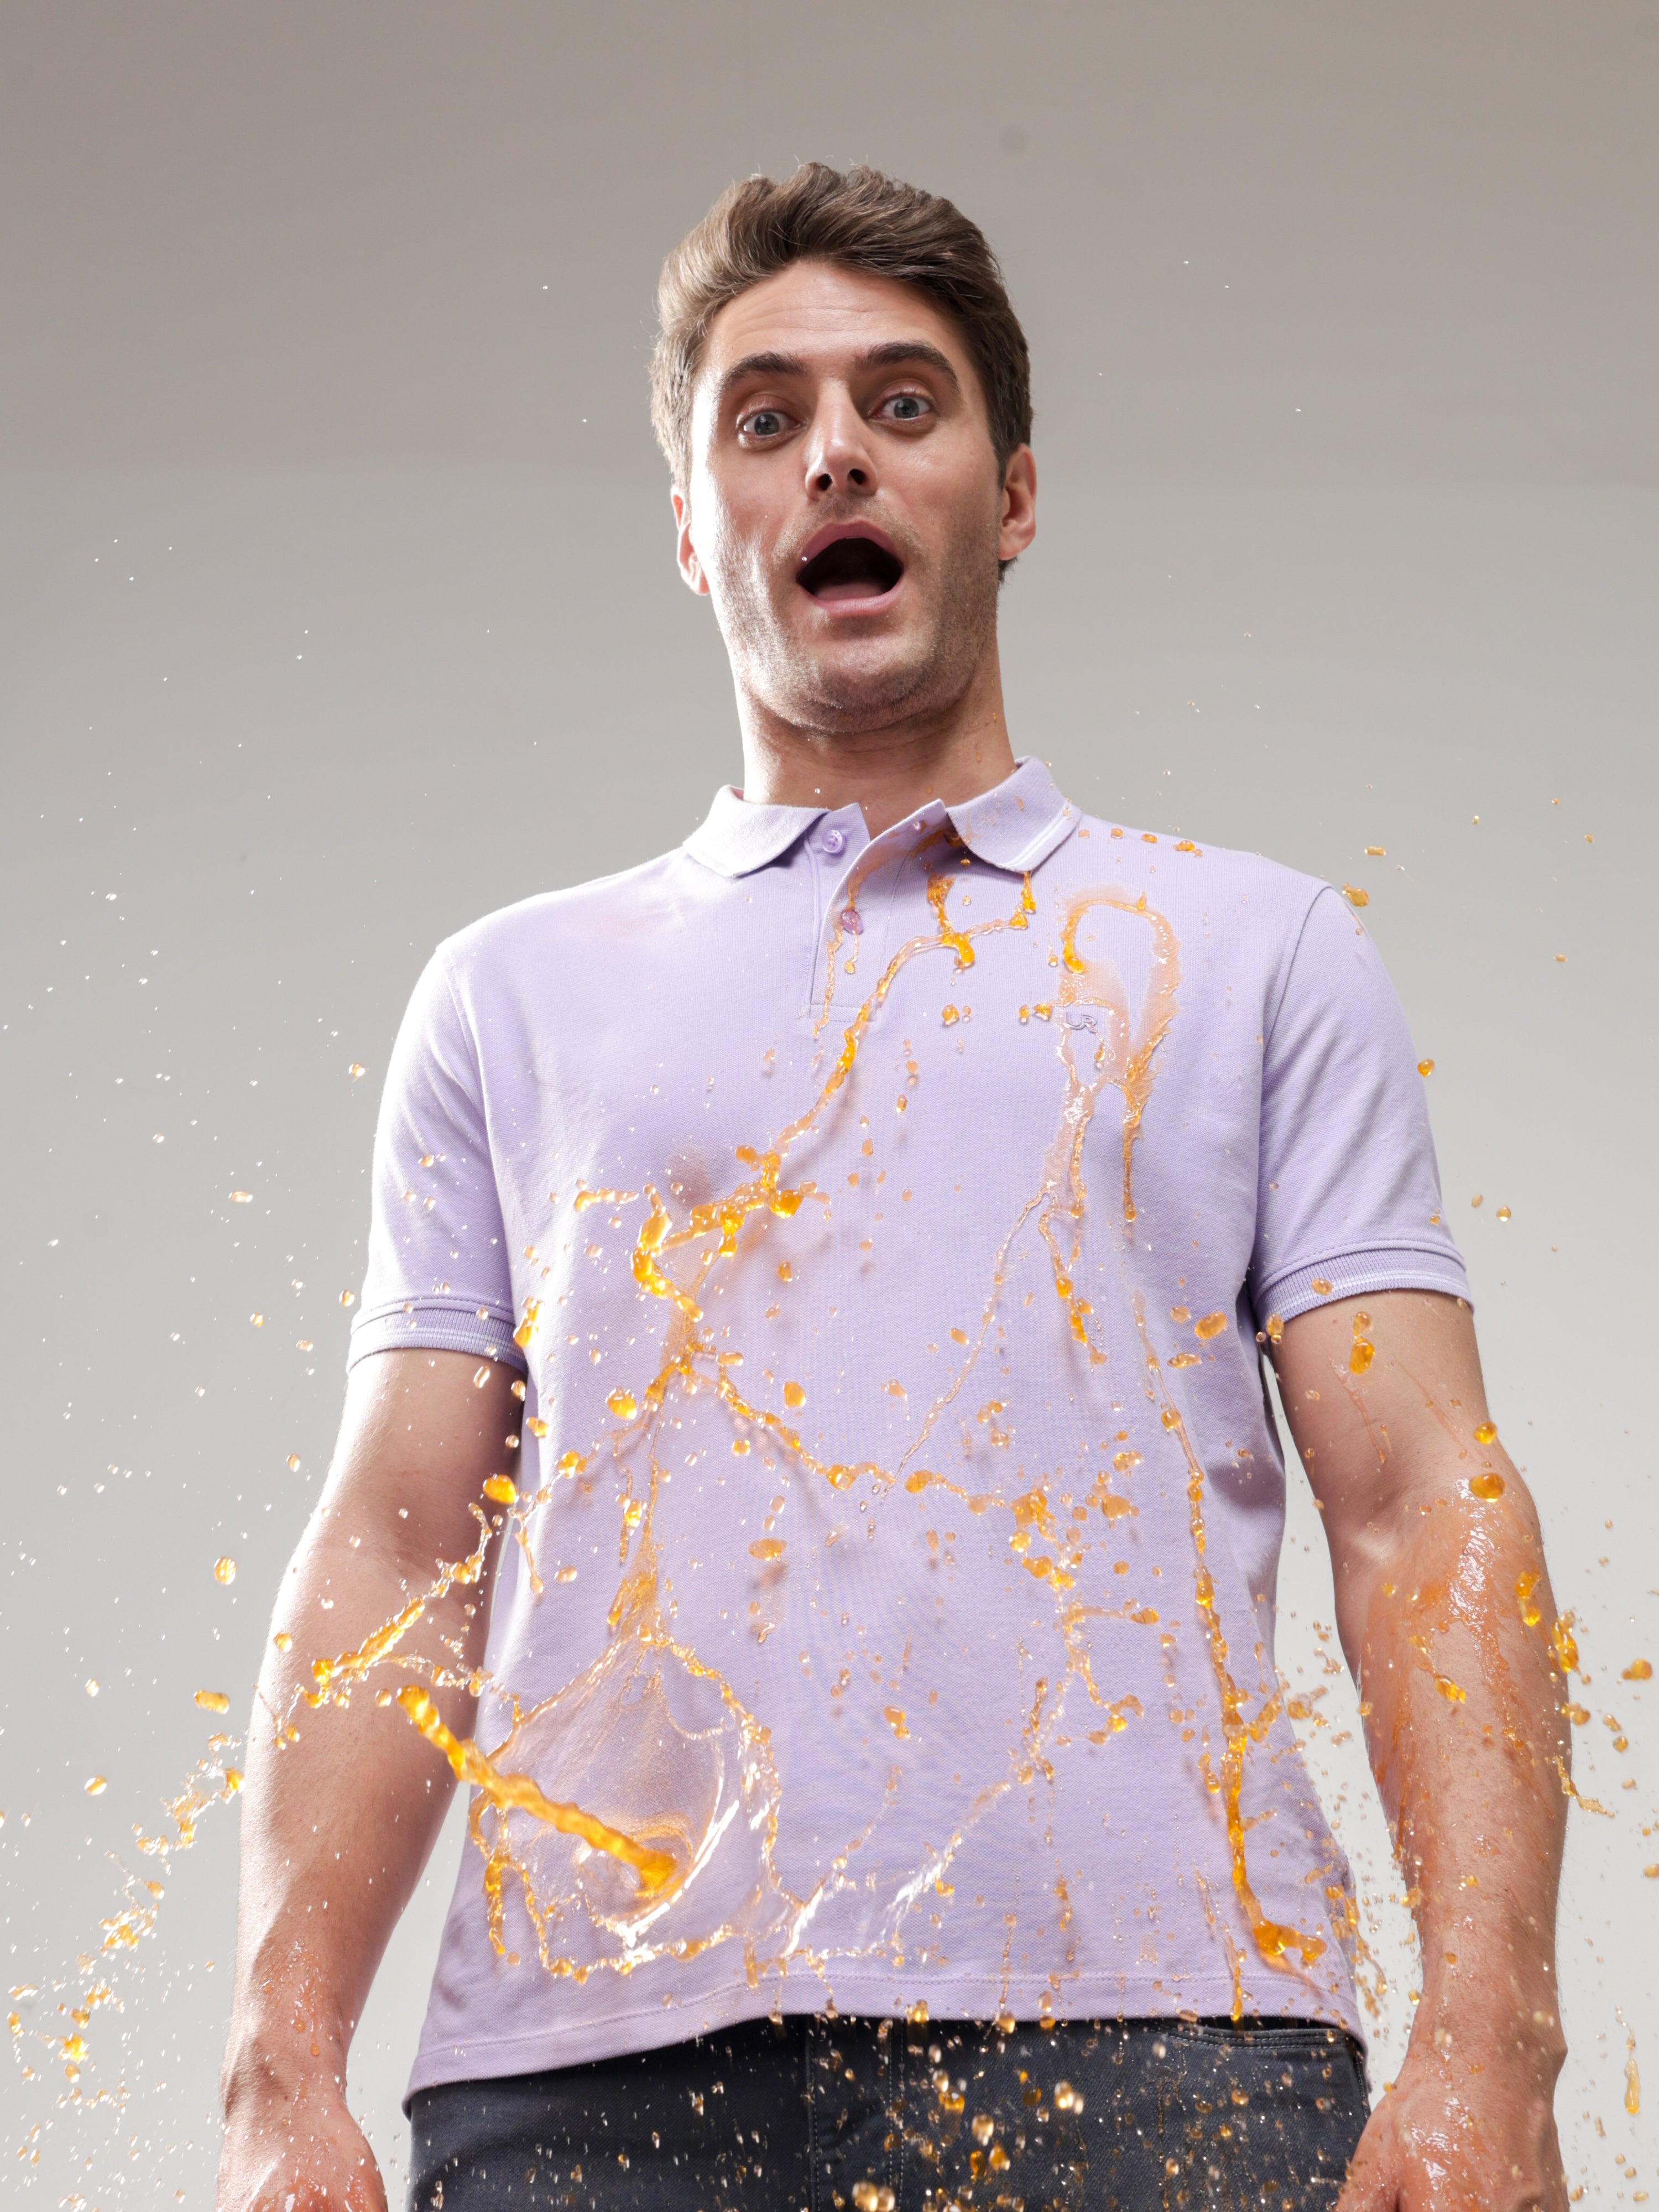 Man wearing stain-repellent Turms Polo T-shirt with liquid spill, showcasing best polo t-shirt for men, water-resistant, anti-stain menswear.